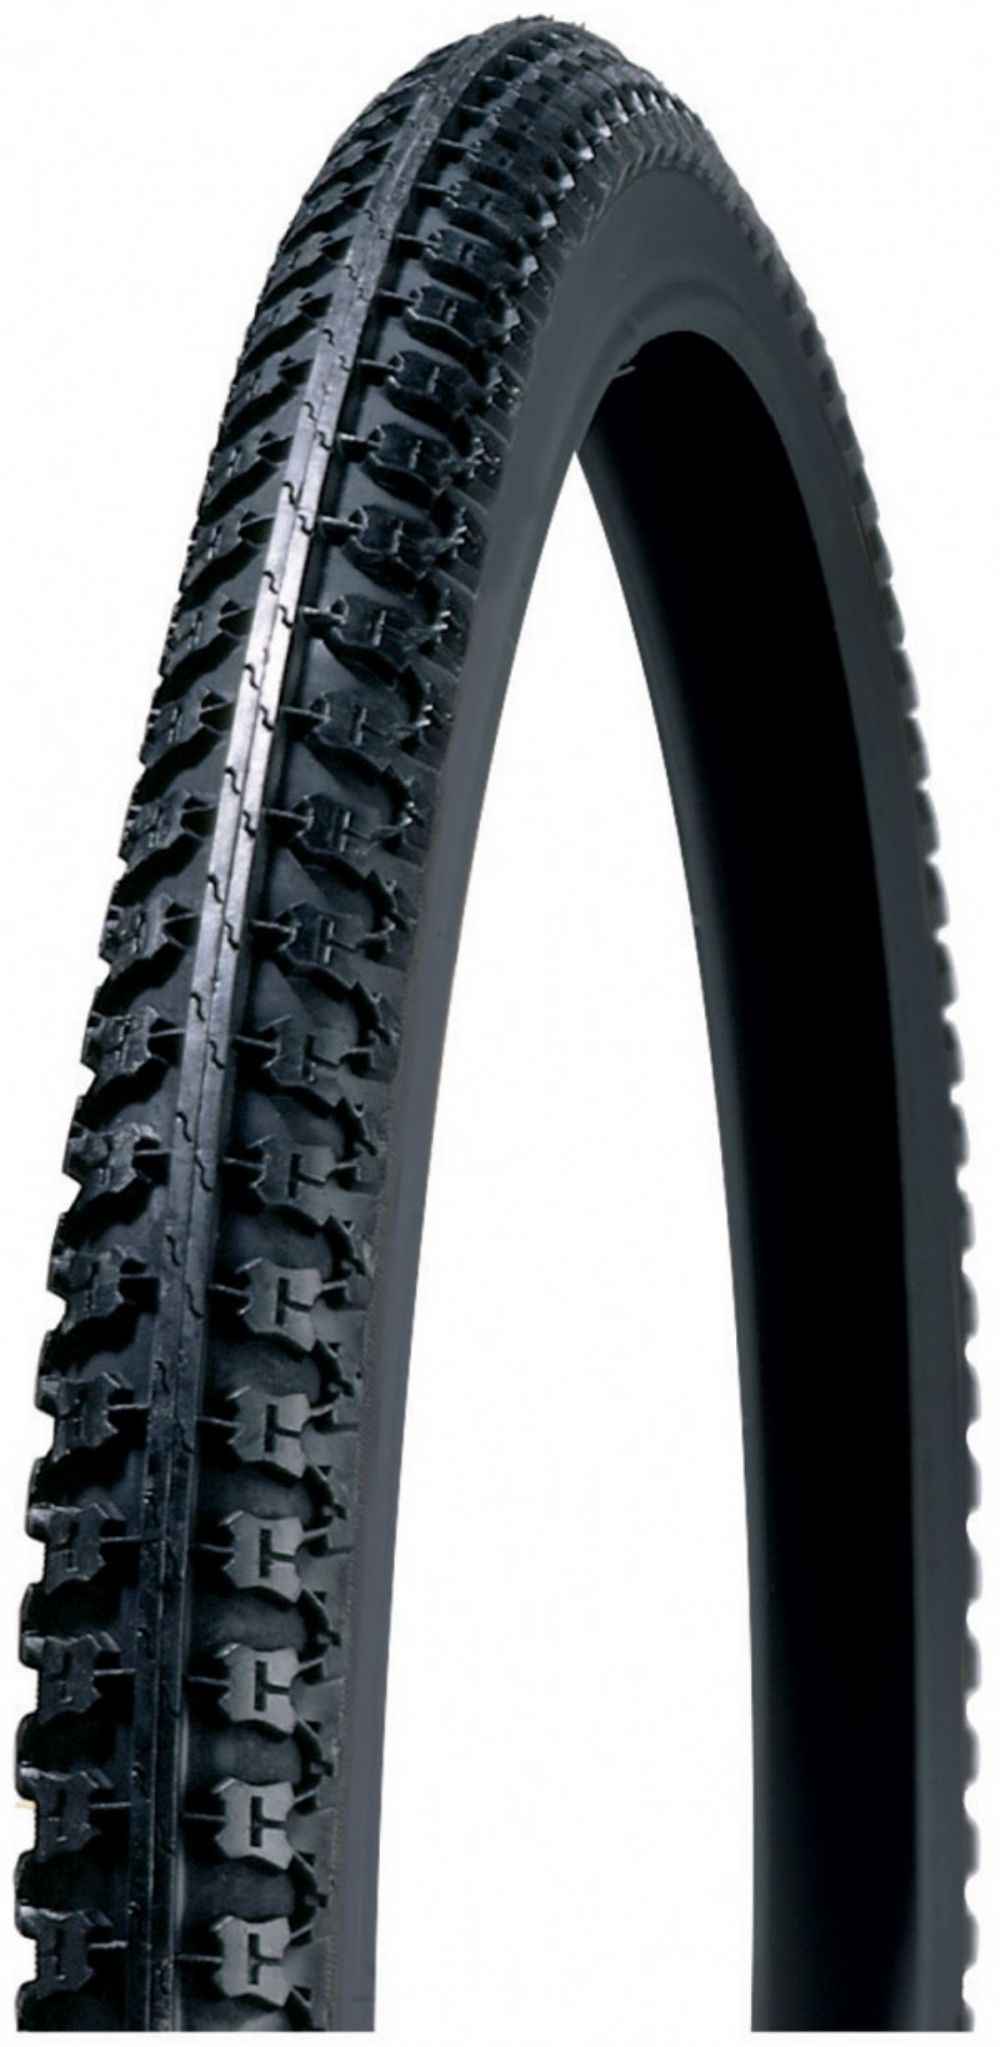 Raleigh 26 X 1.75 Centre Raised Cycle Tyre - Free Tube - £9.49 | Tyres ...